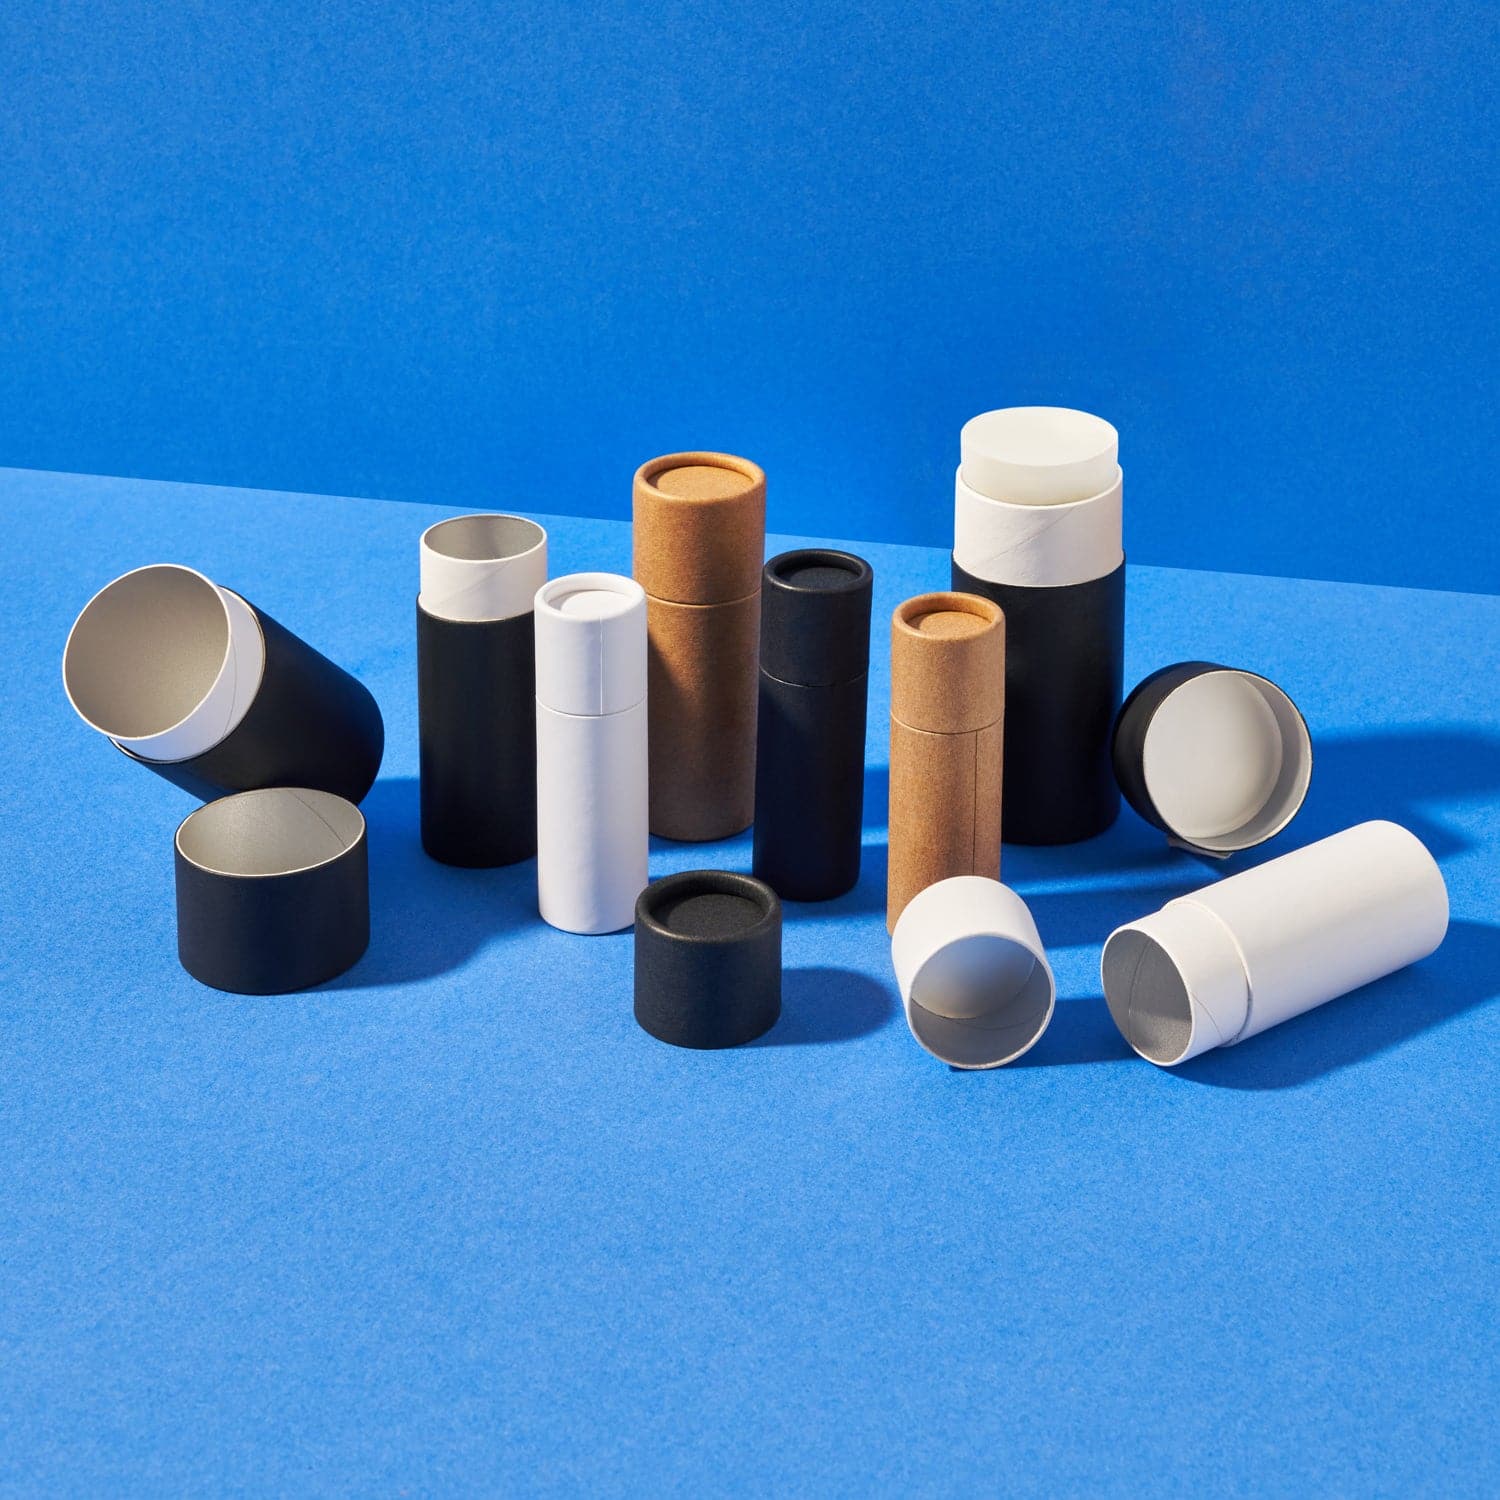 A collection of cardboard tubes with push up bases and internal lining in black, white and brown. Some tubes have lids off and one cardboard tube contains deodorant.